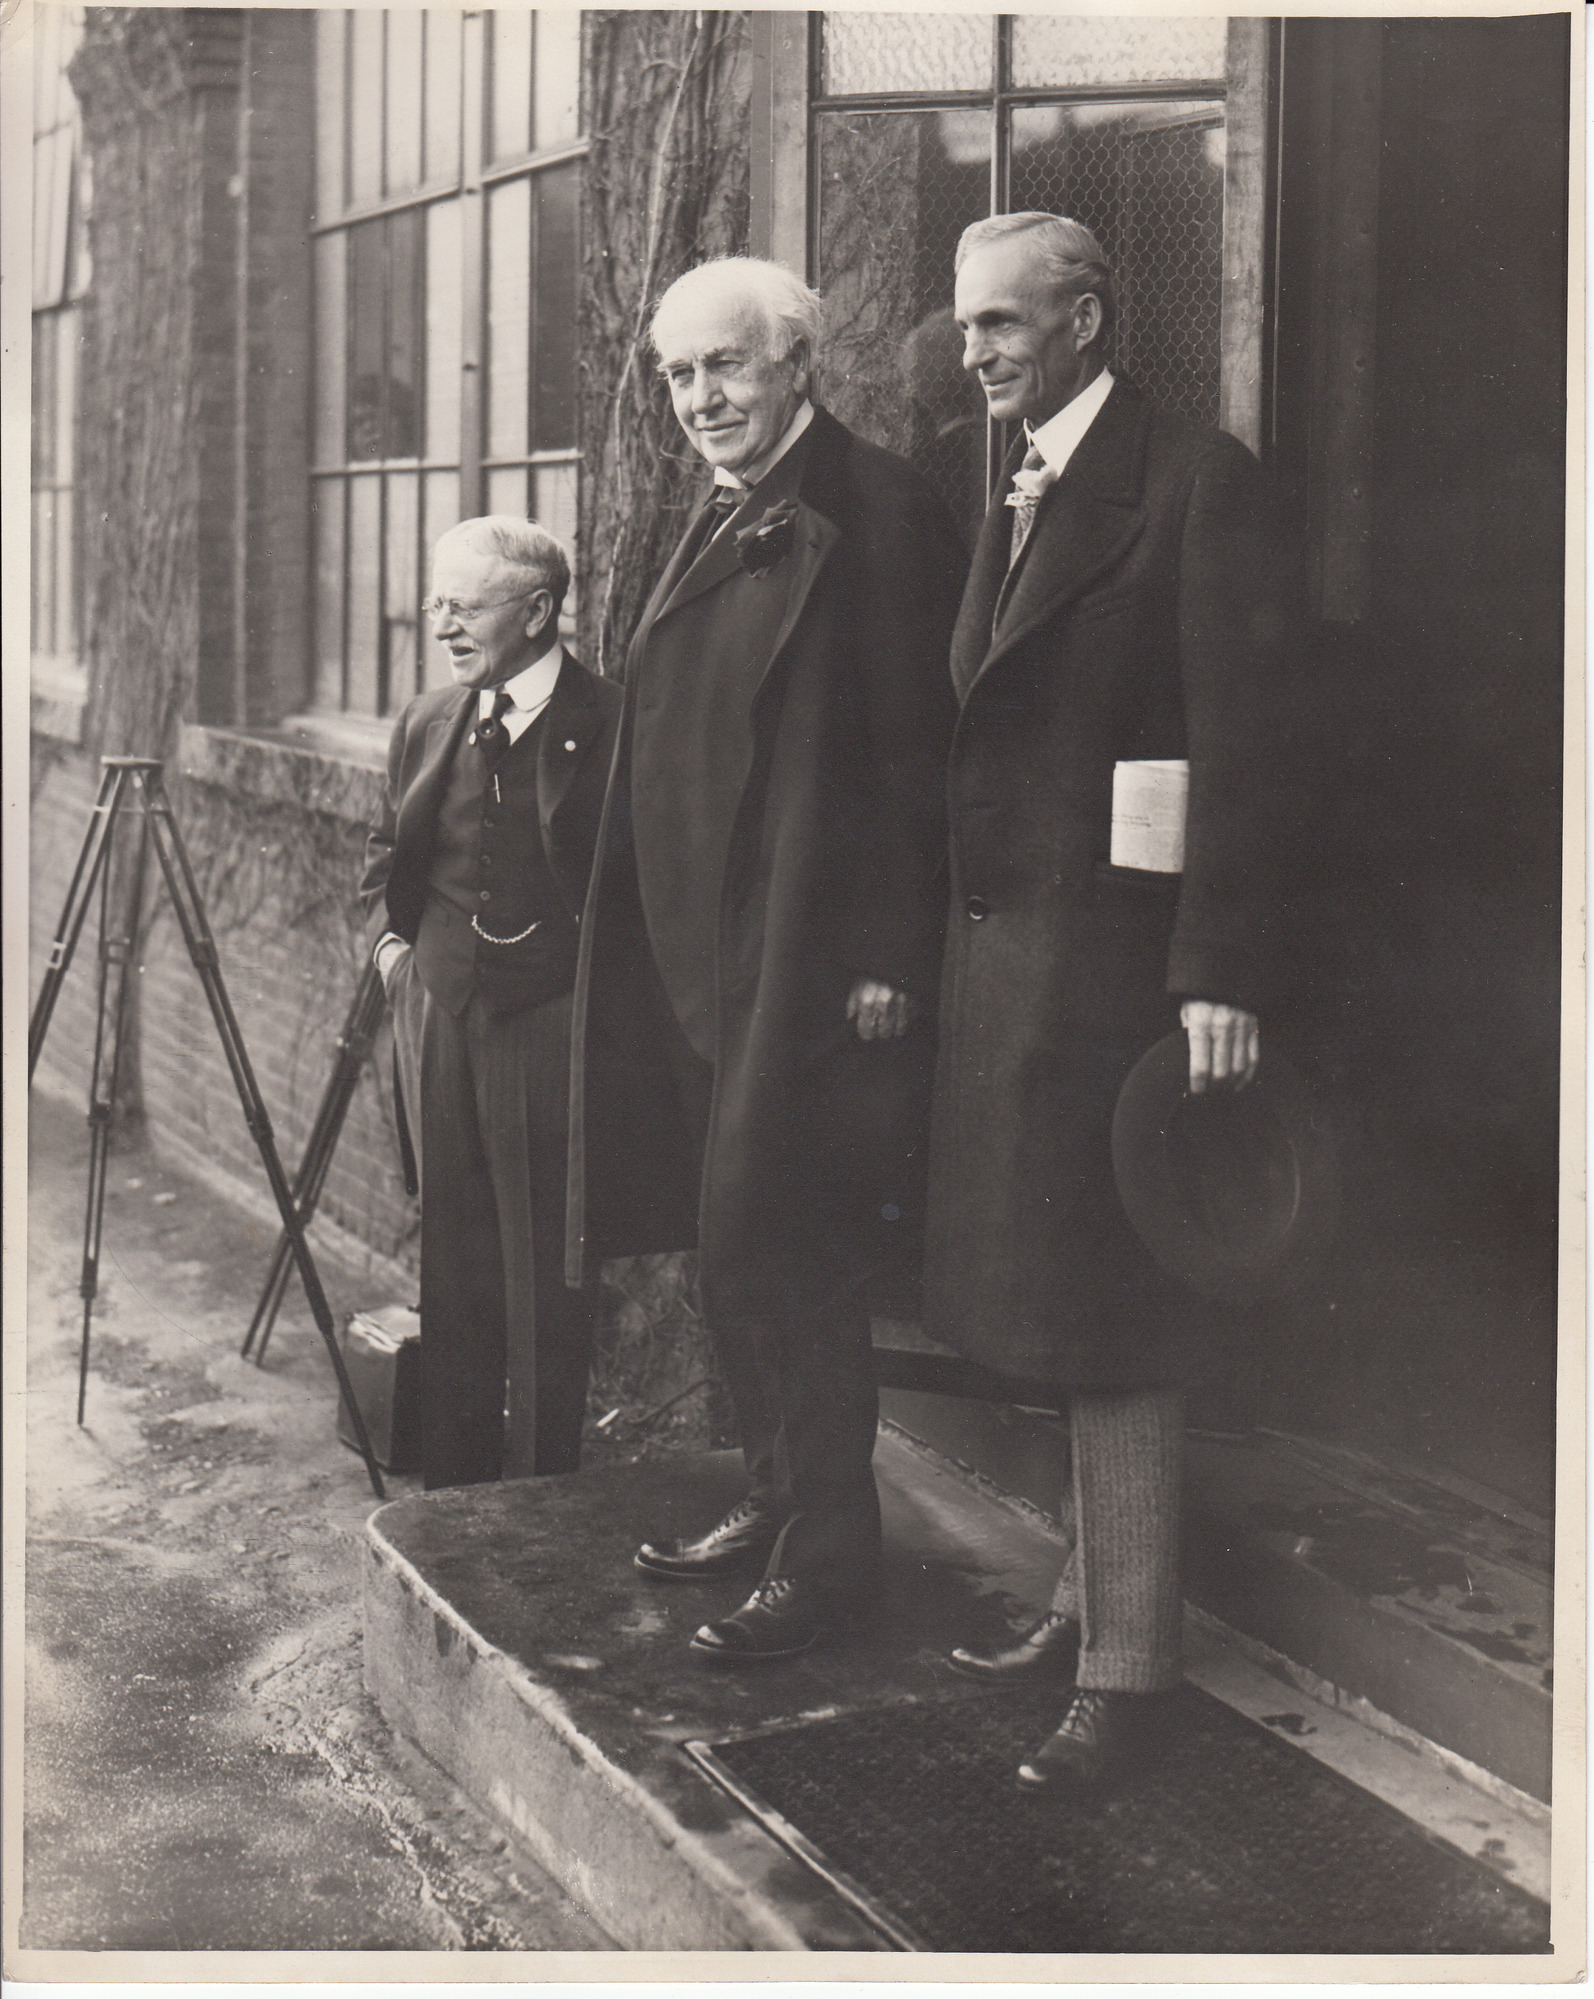 William H. Meadowcroft, Thomas Edison, and Henry Ford at the door to Building 5 at Edison's West Orange Laboratory.